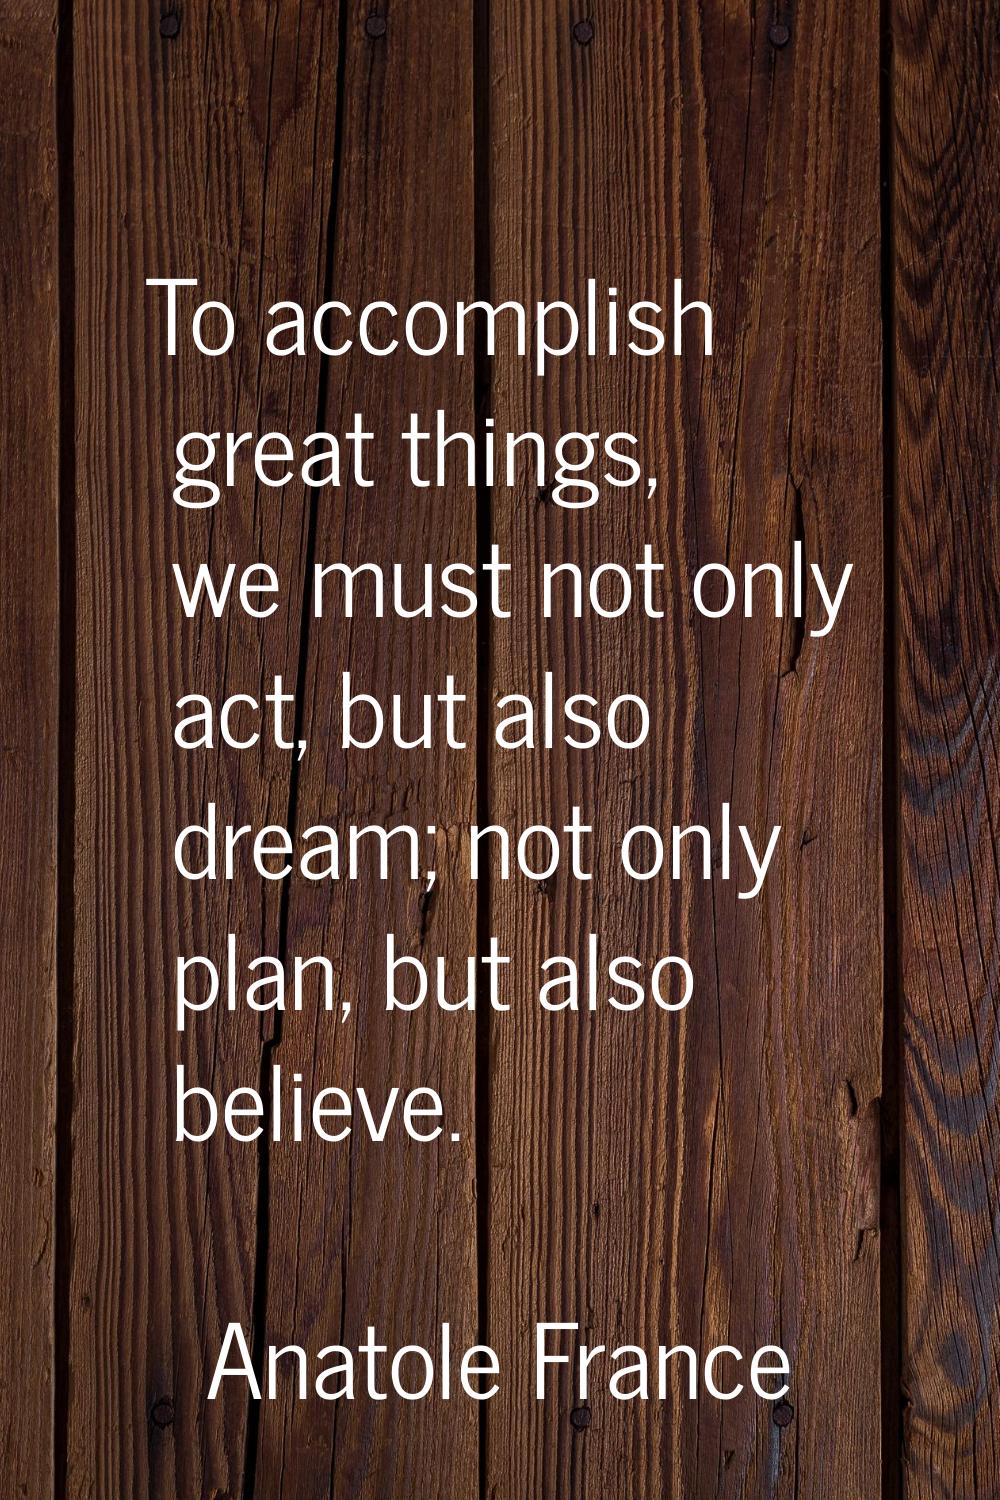 To accomplish great things, we must not only act, but also dream; not only plan, but also believe.